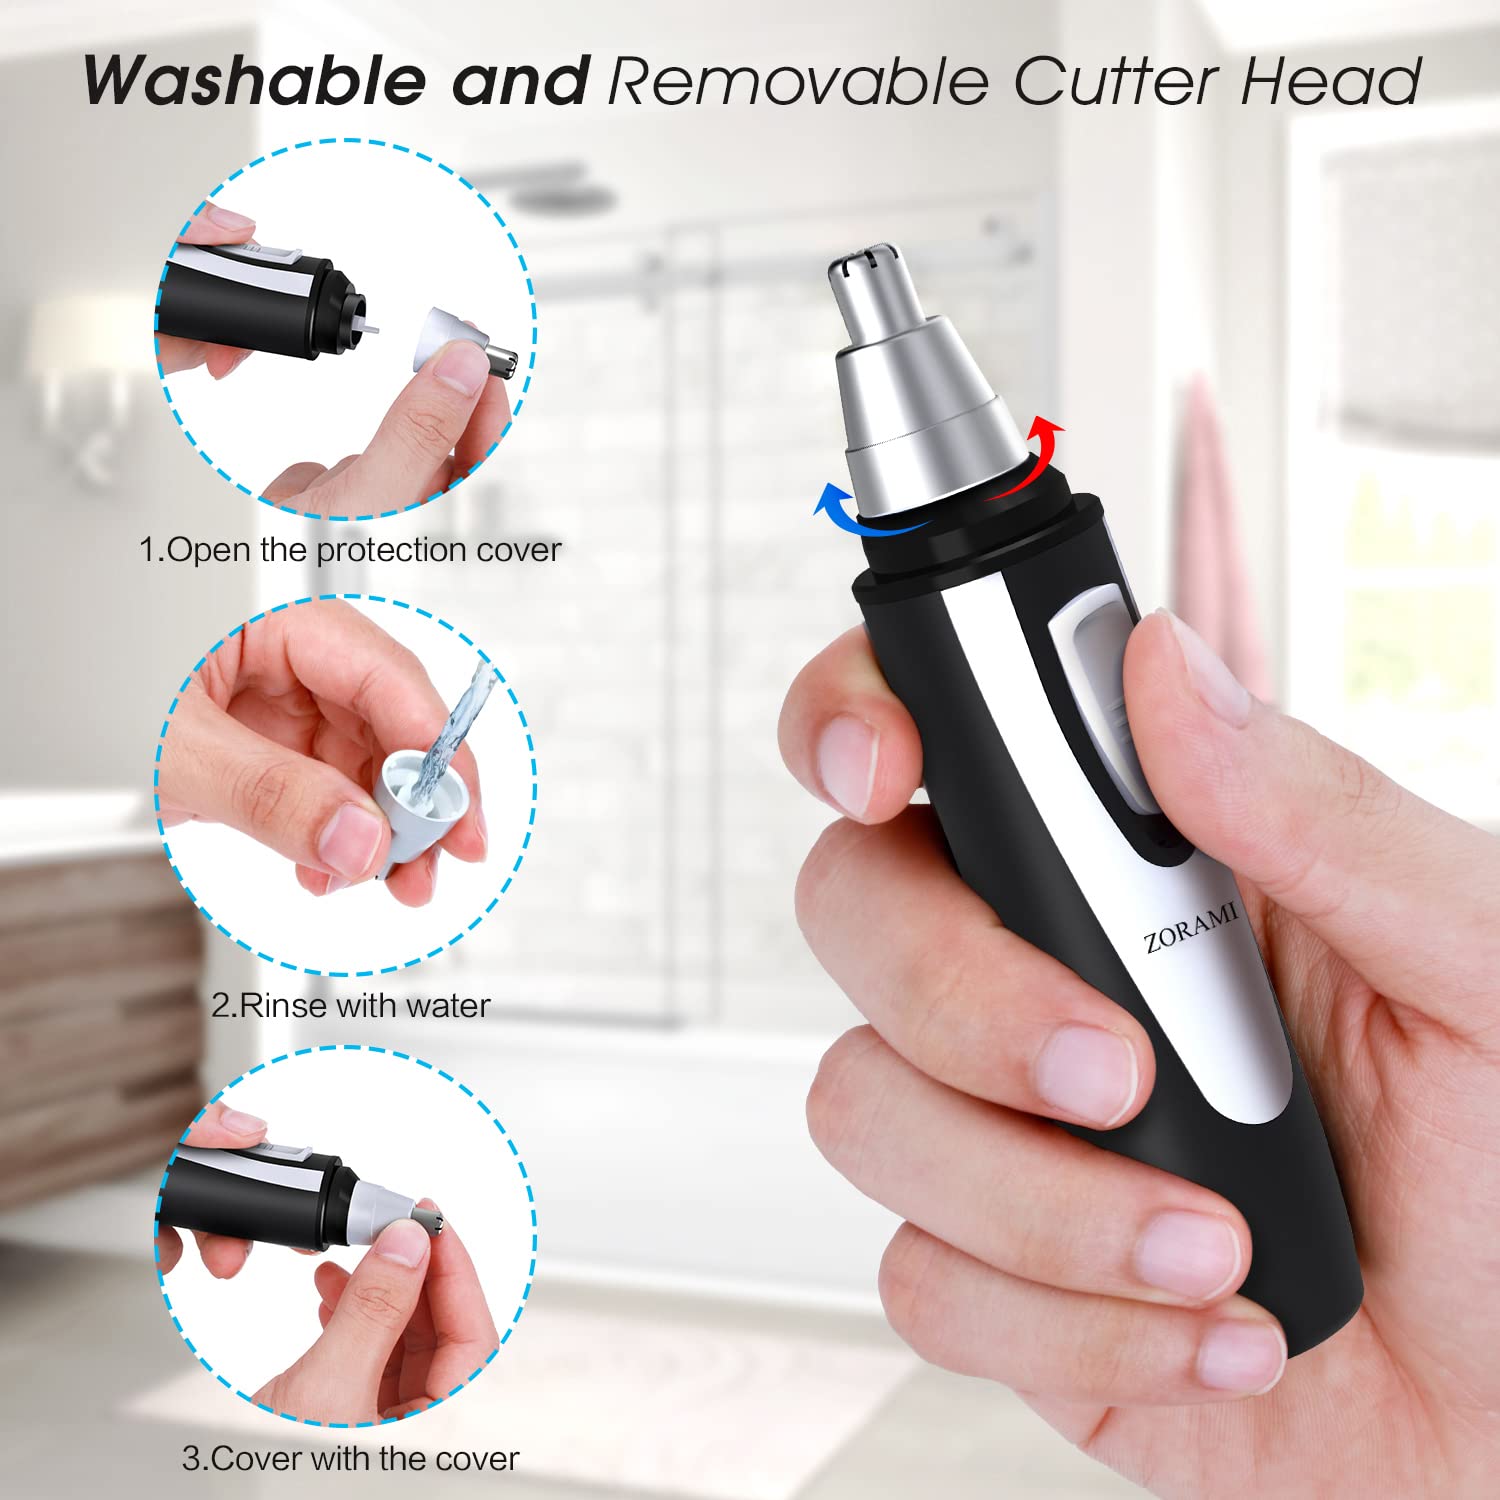 Ear and Nose Hair Trimmer Clipper - 2022 Professional Painless Eyebrow & Facial Hair Trimmer for Men Women, Battery-Operated Trimmer with IPX7 Waterproof, Dual Edge Blades for Easy Cleansing Black